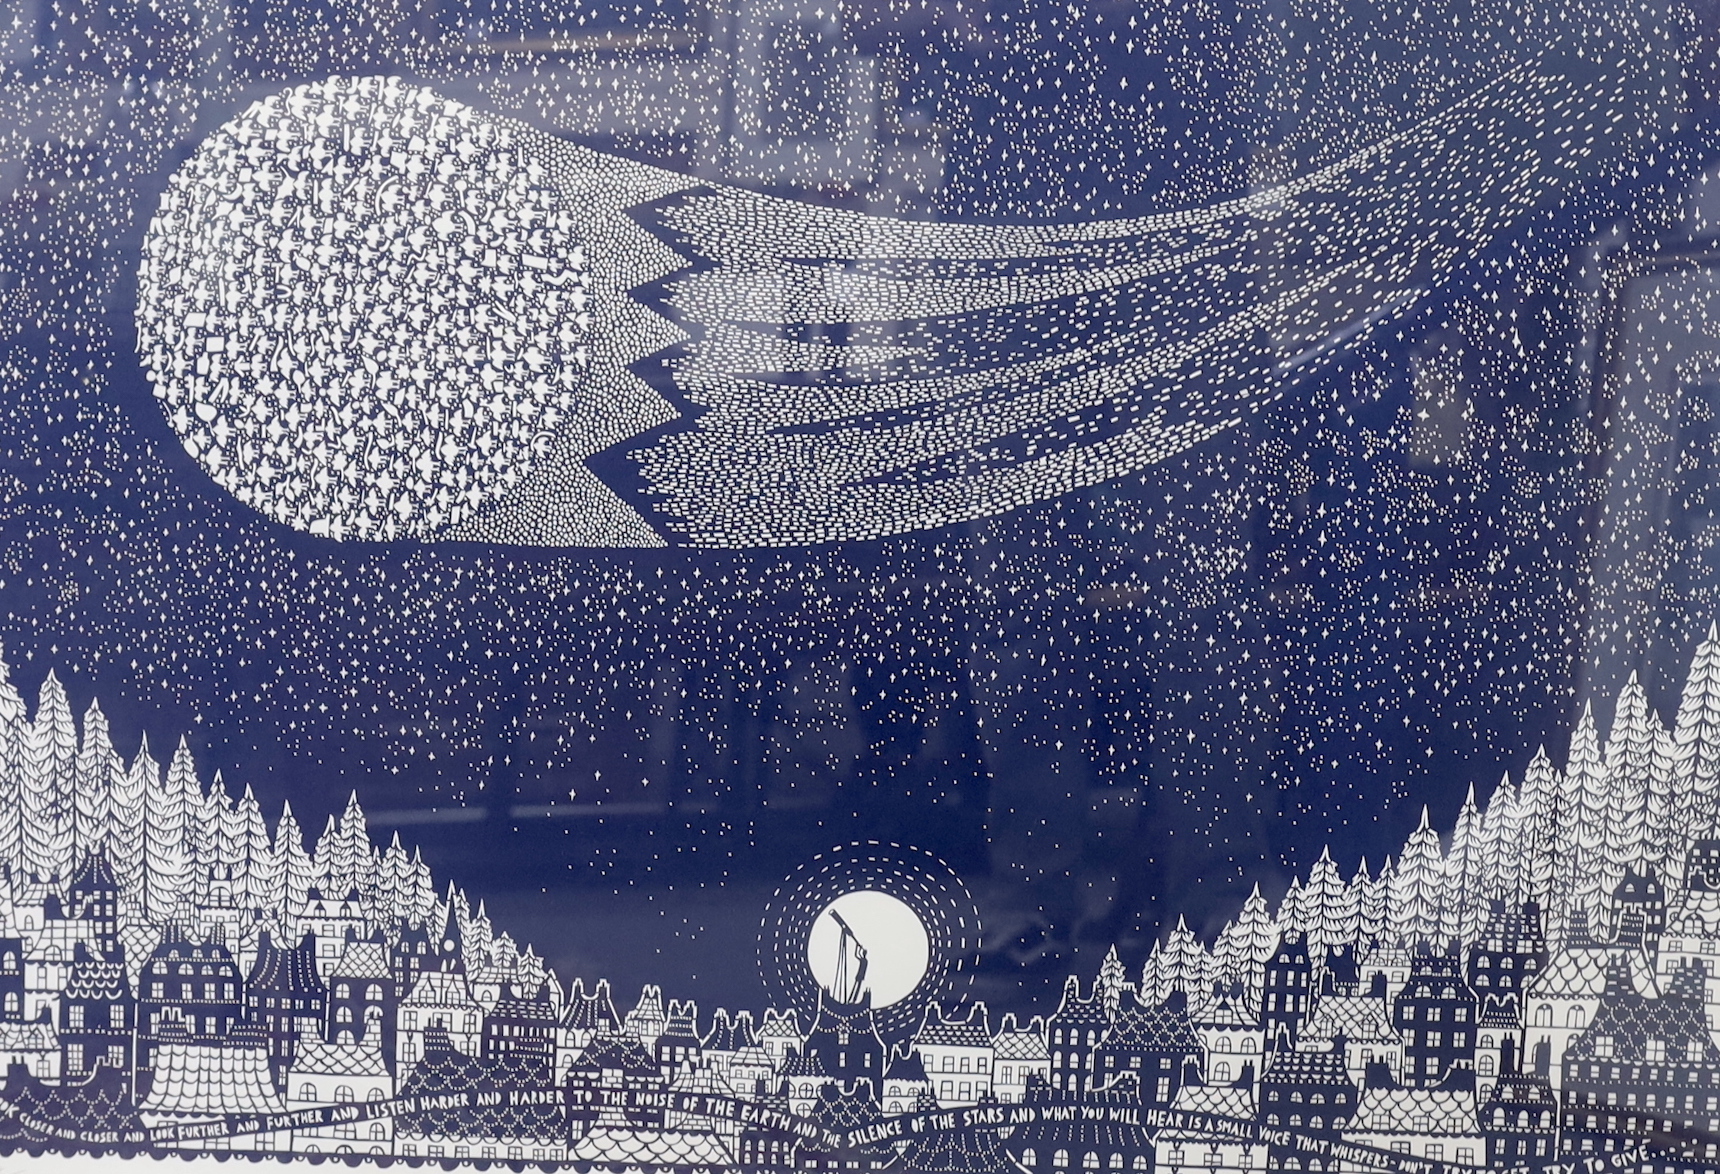 Rob Ryan (b.1962), colour screenprint, 'Look Closer', signed in pencil, limited edition 64/100, 74 x 108cm